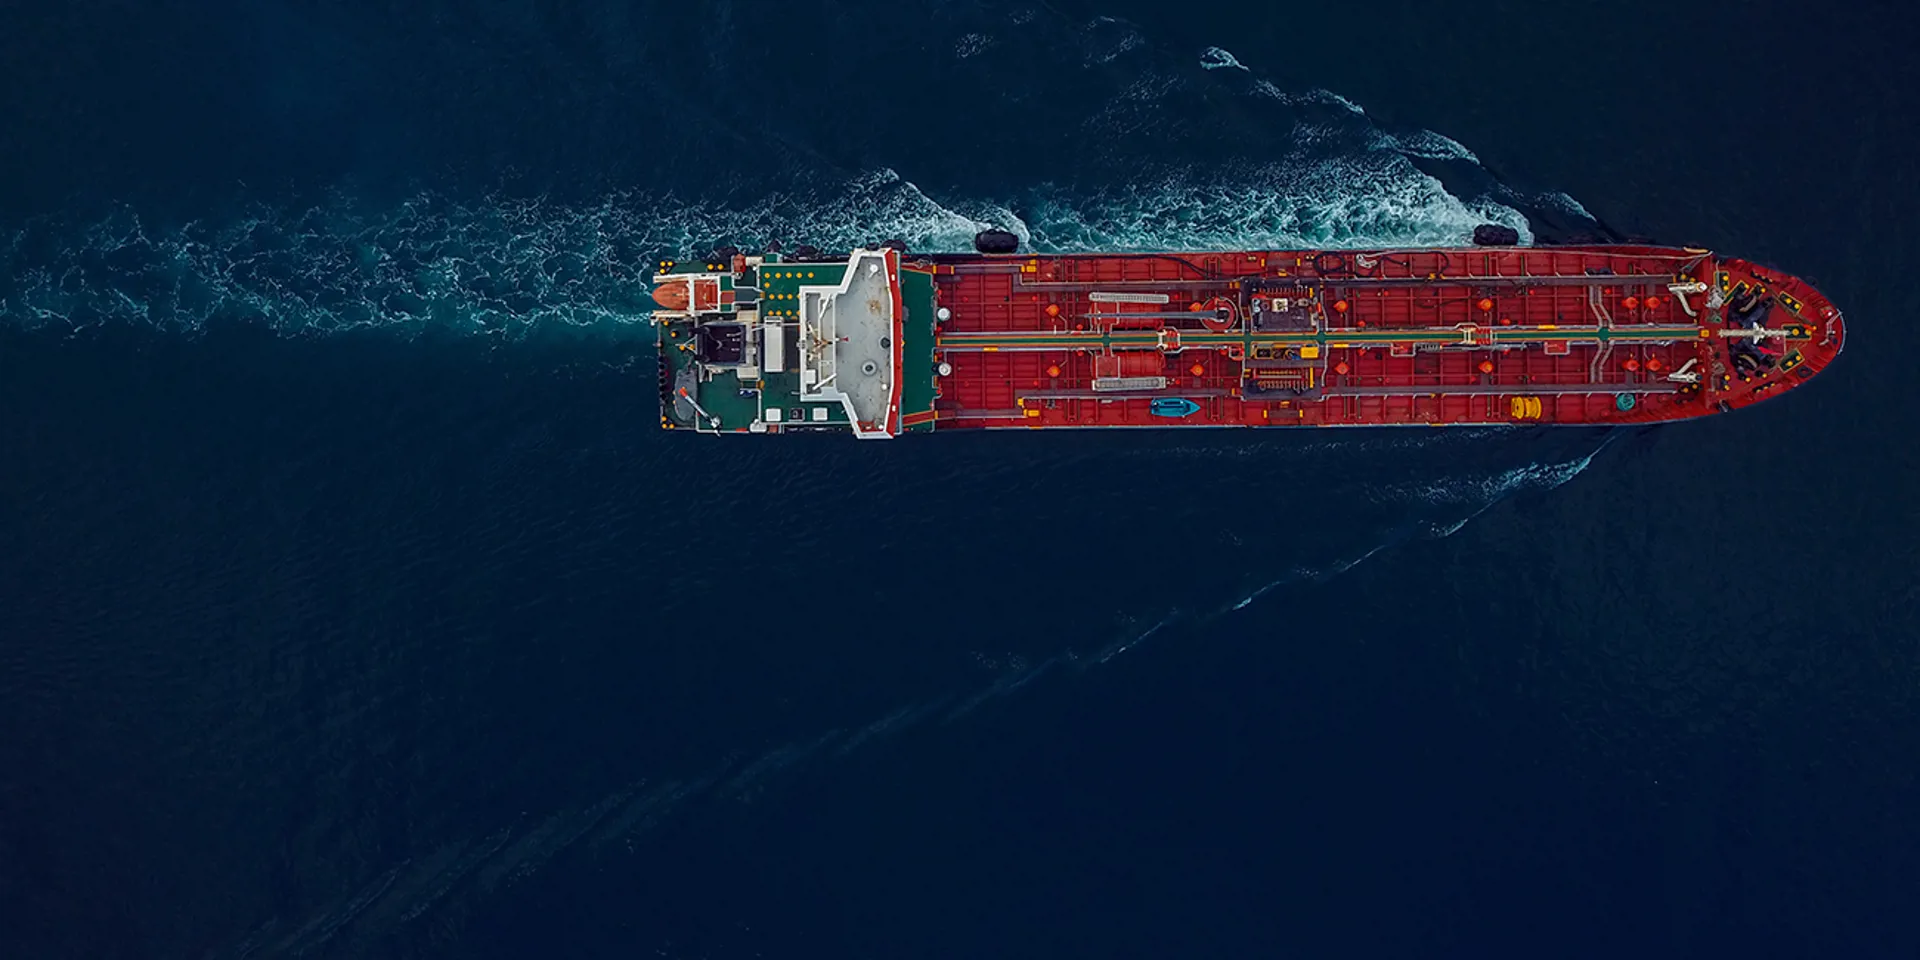 Aerial view of an oil tanker on the move